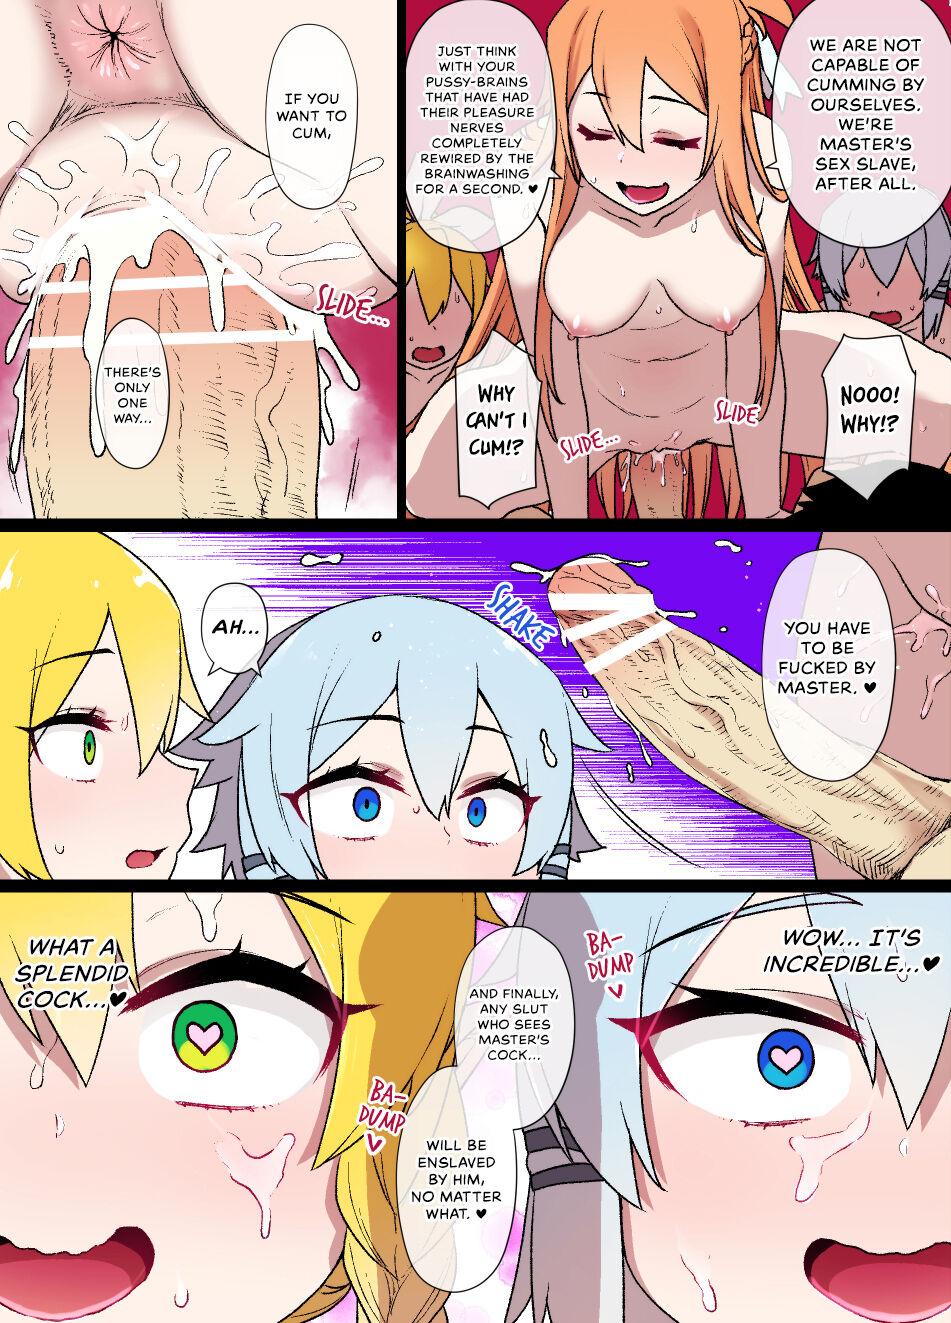 Hot Fucking SAO - Sword art online Cougar - Page 6